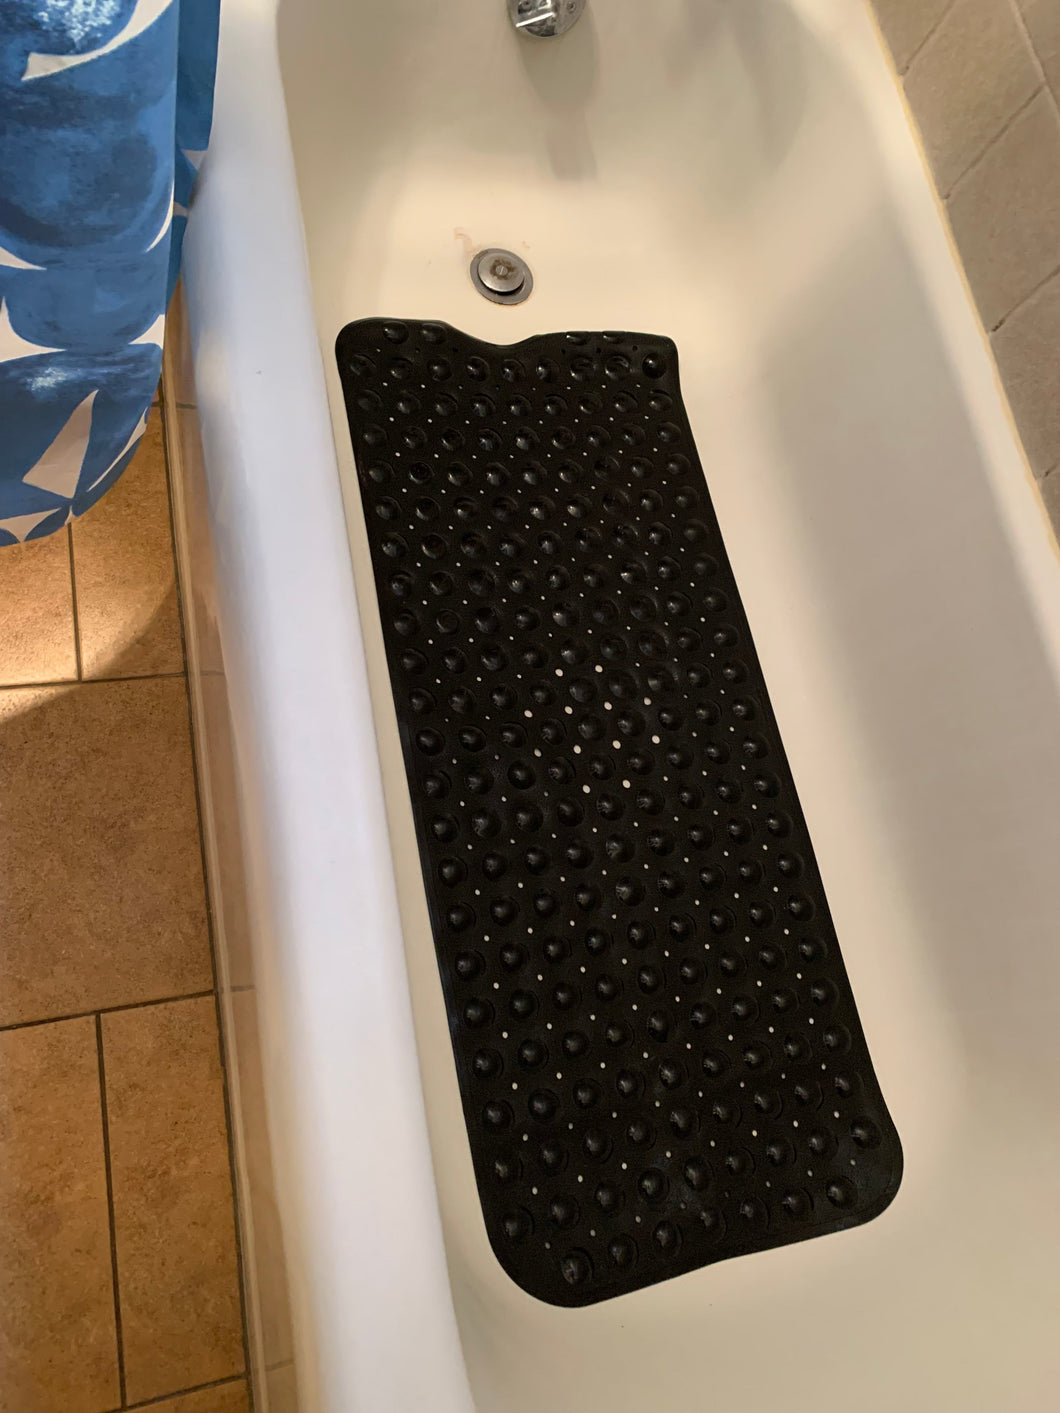 A long black shower mat with small holes is on the floor of a white bathtub.